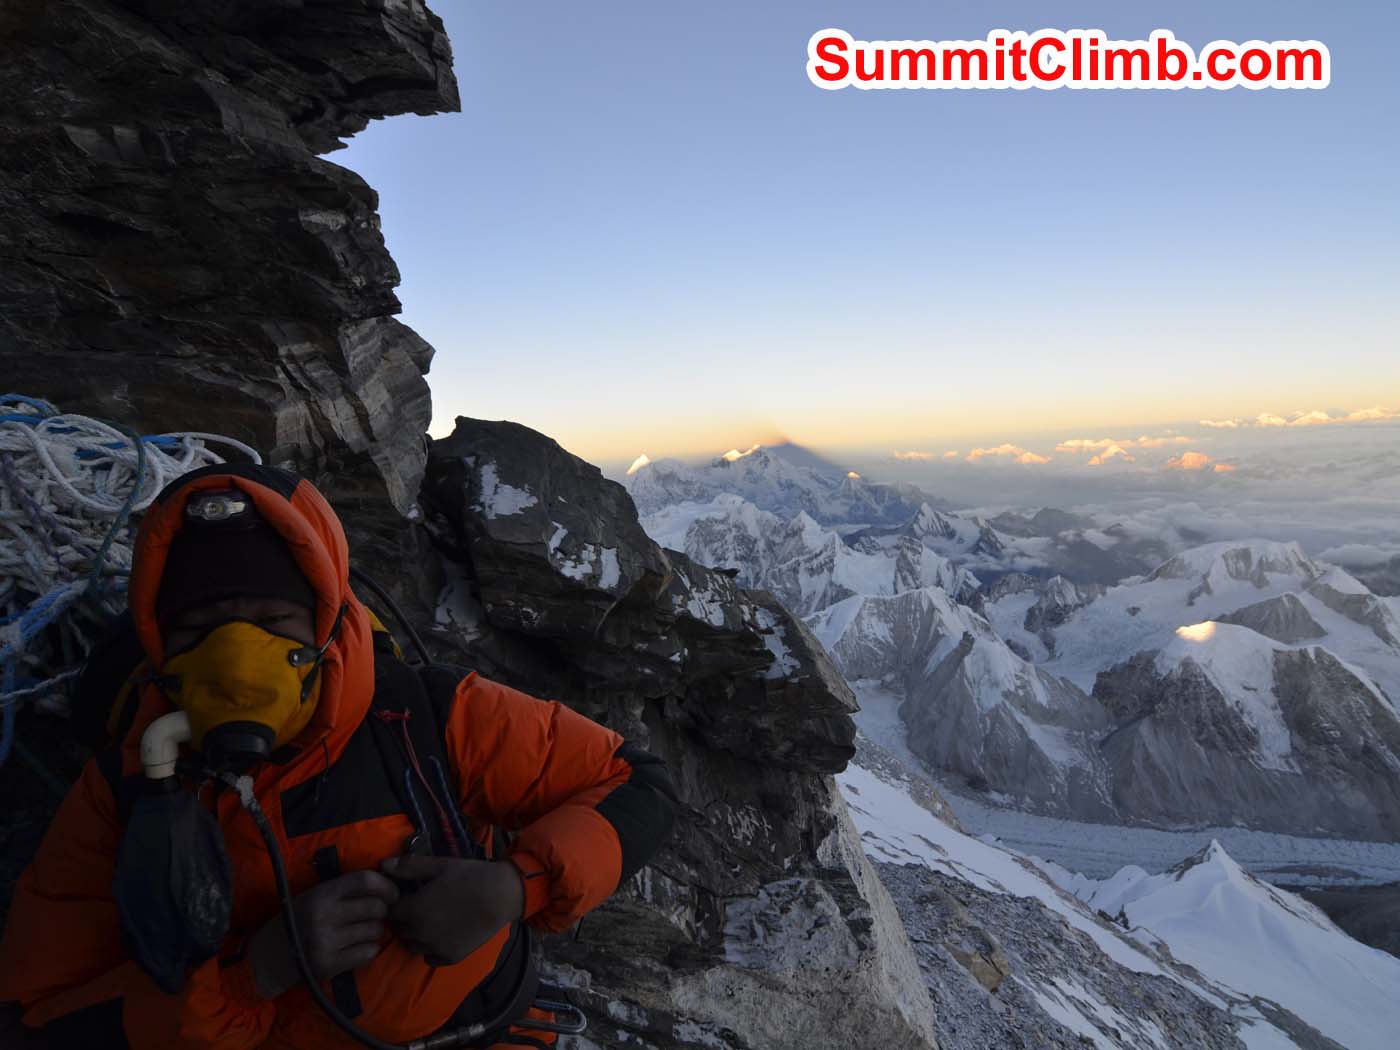 Pasang Sherpa takes a break in the rock band during the ascent to the summit. Dmitri Nichiporov photo